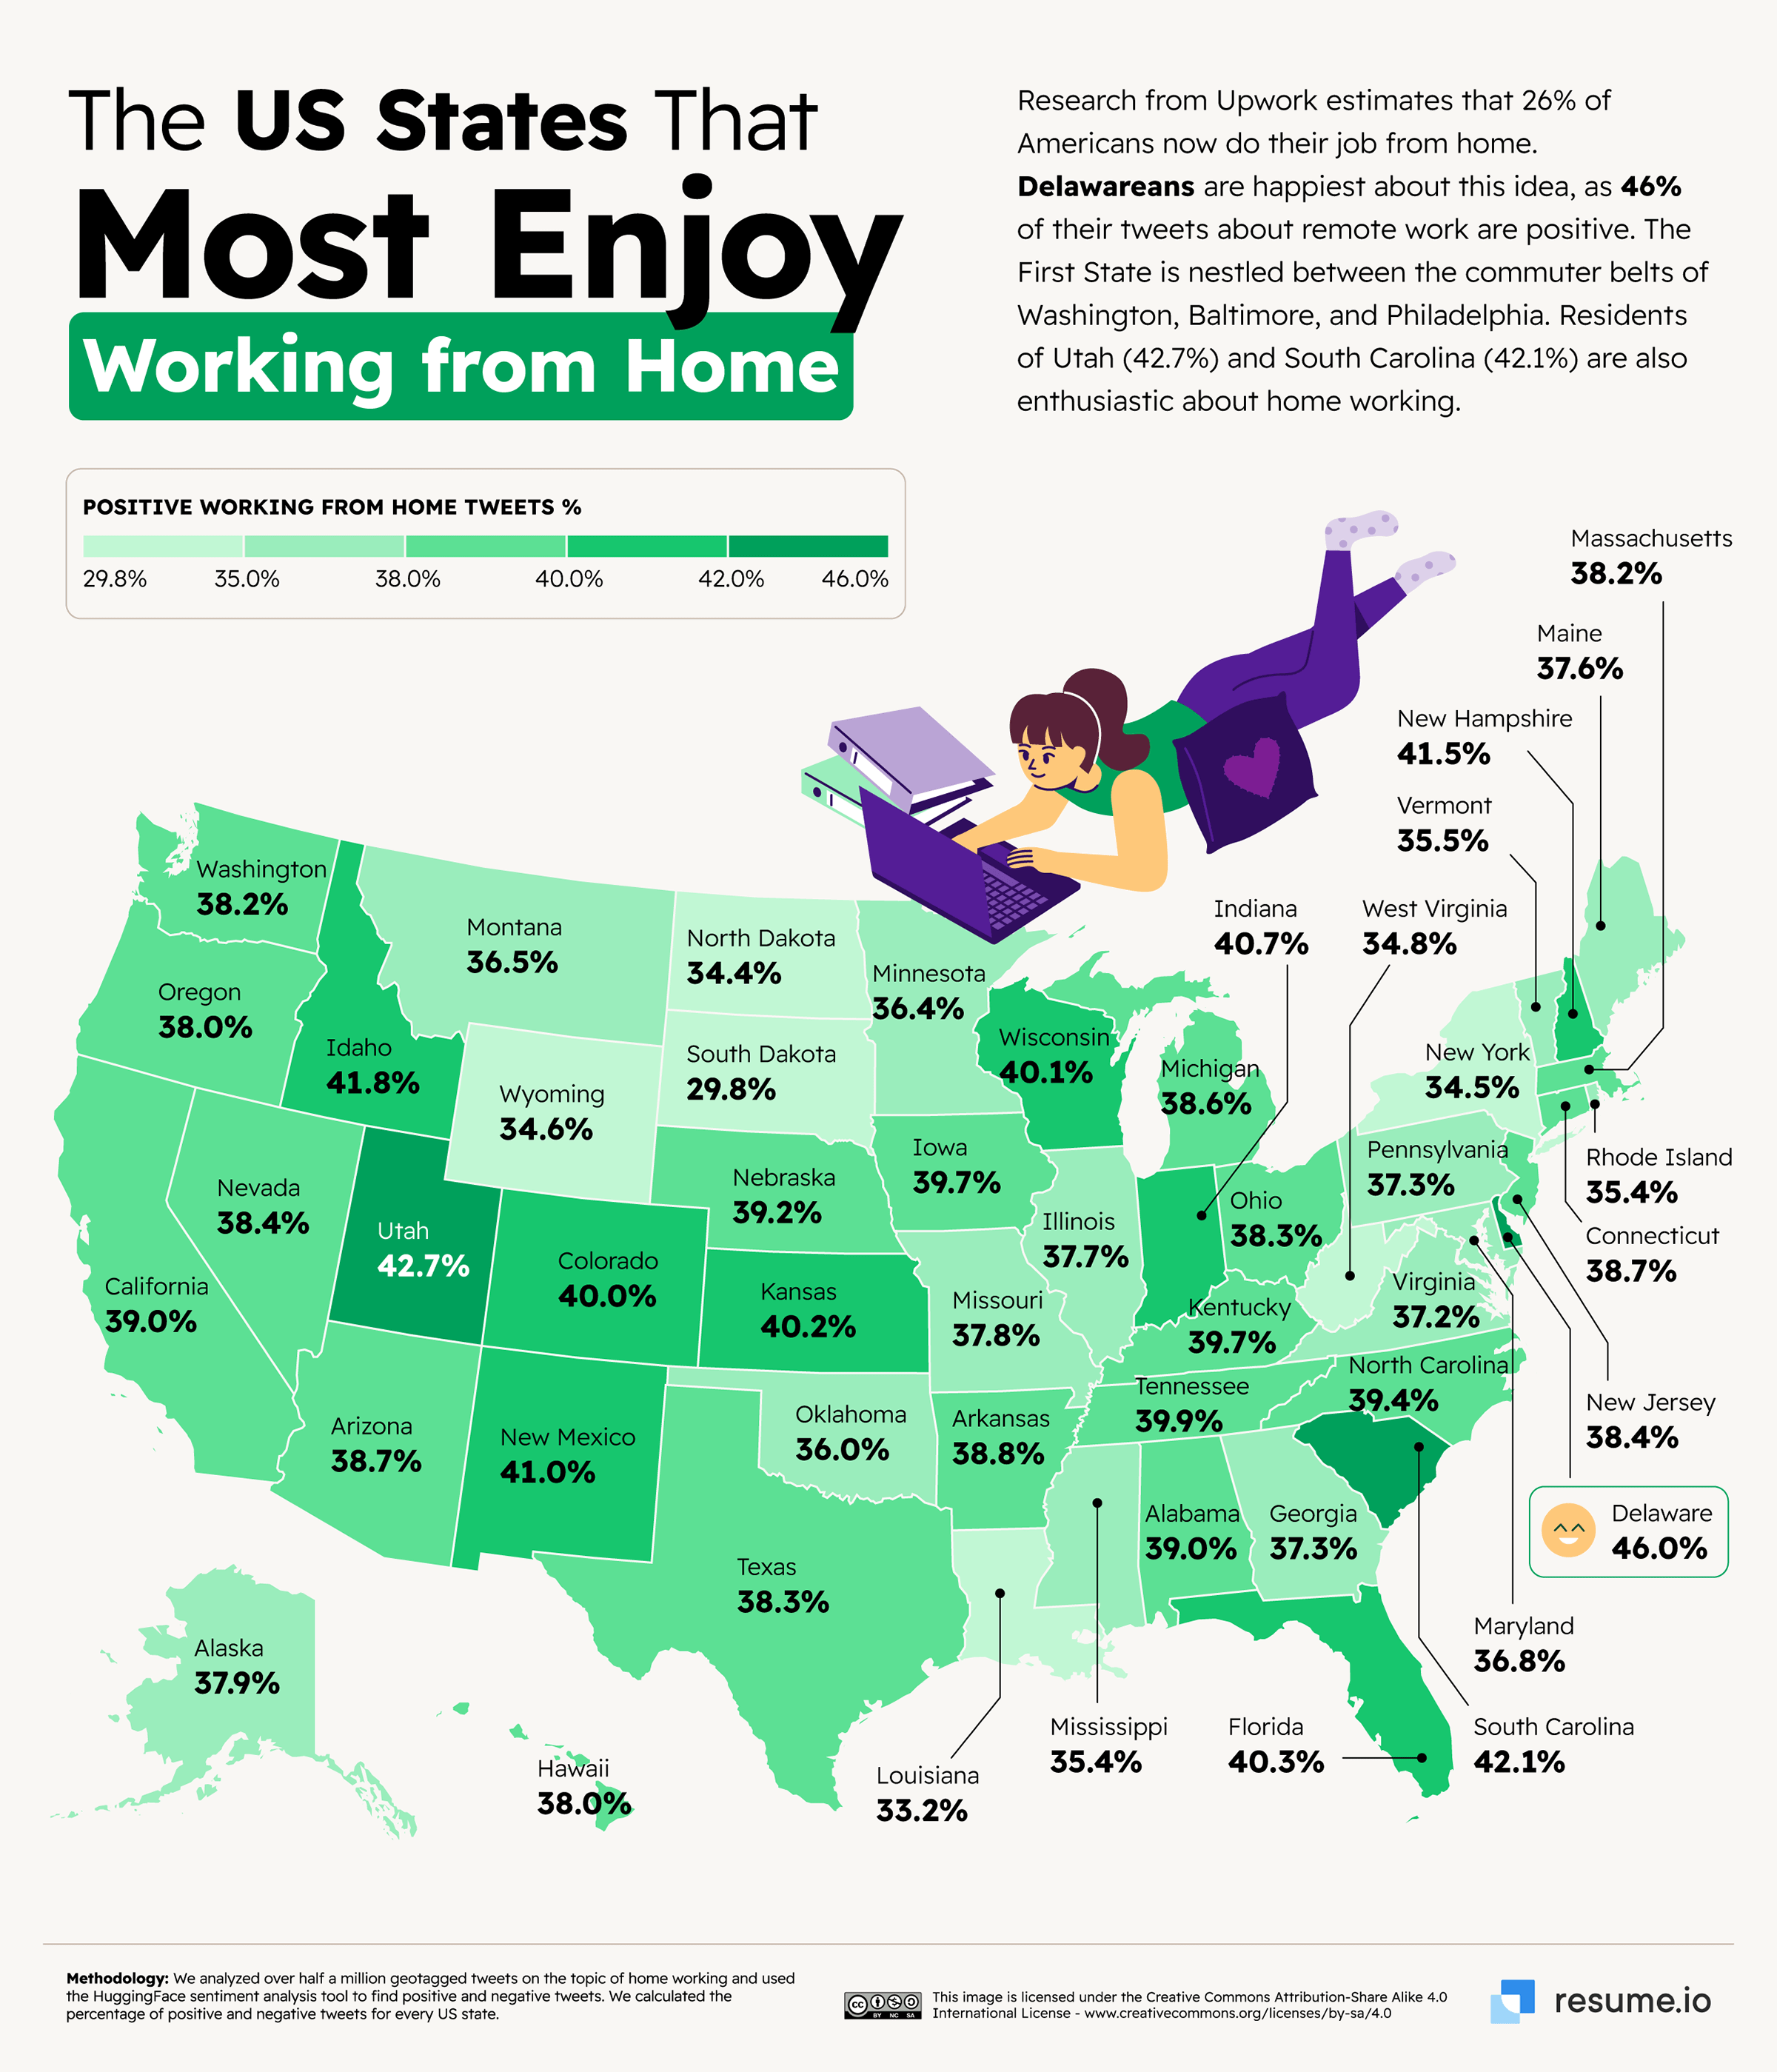 The US States that most enjoy working from home.